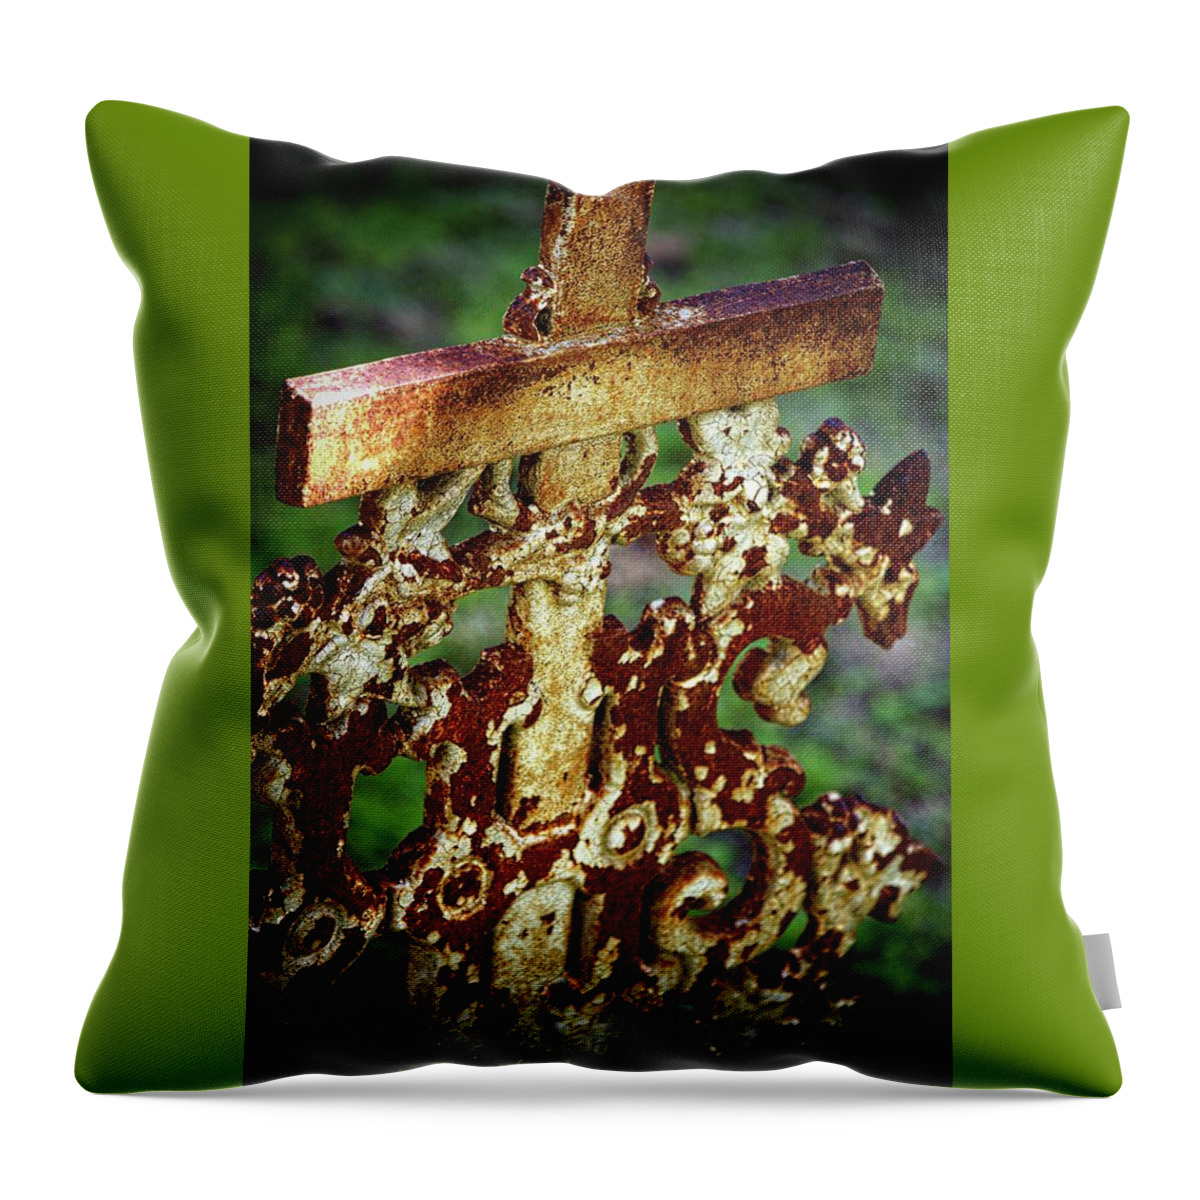 Abstract Throw Pillow featuring the photograph Graveyard Rustic Beauty by Michelle Liebenberg